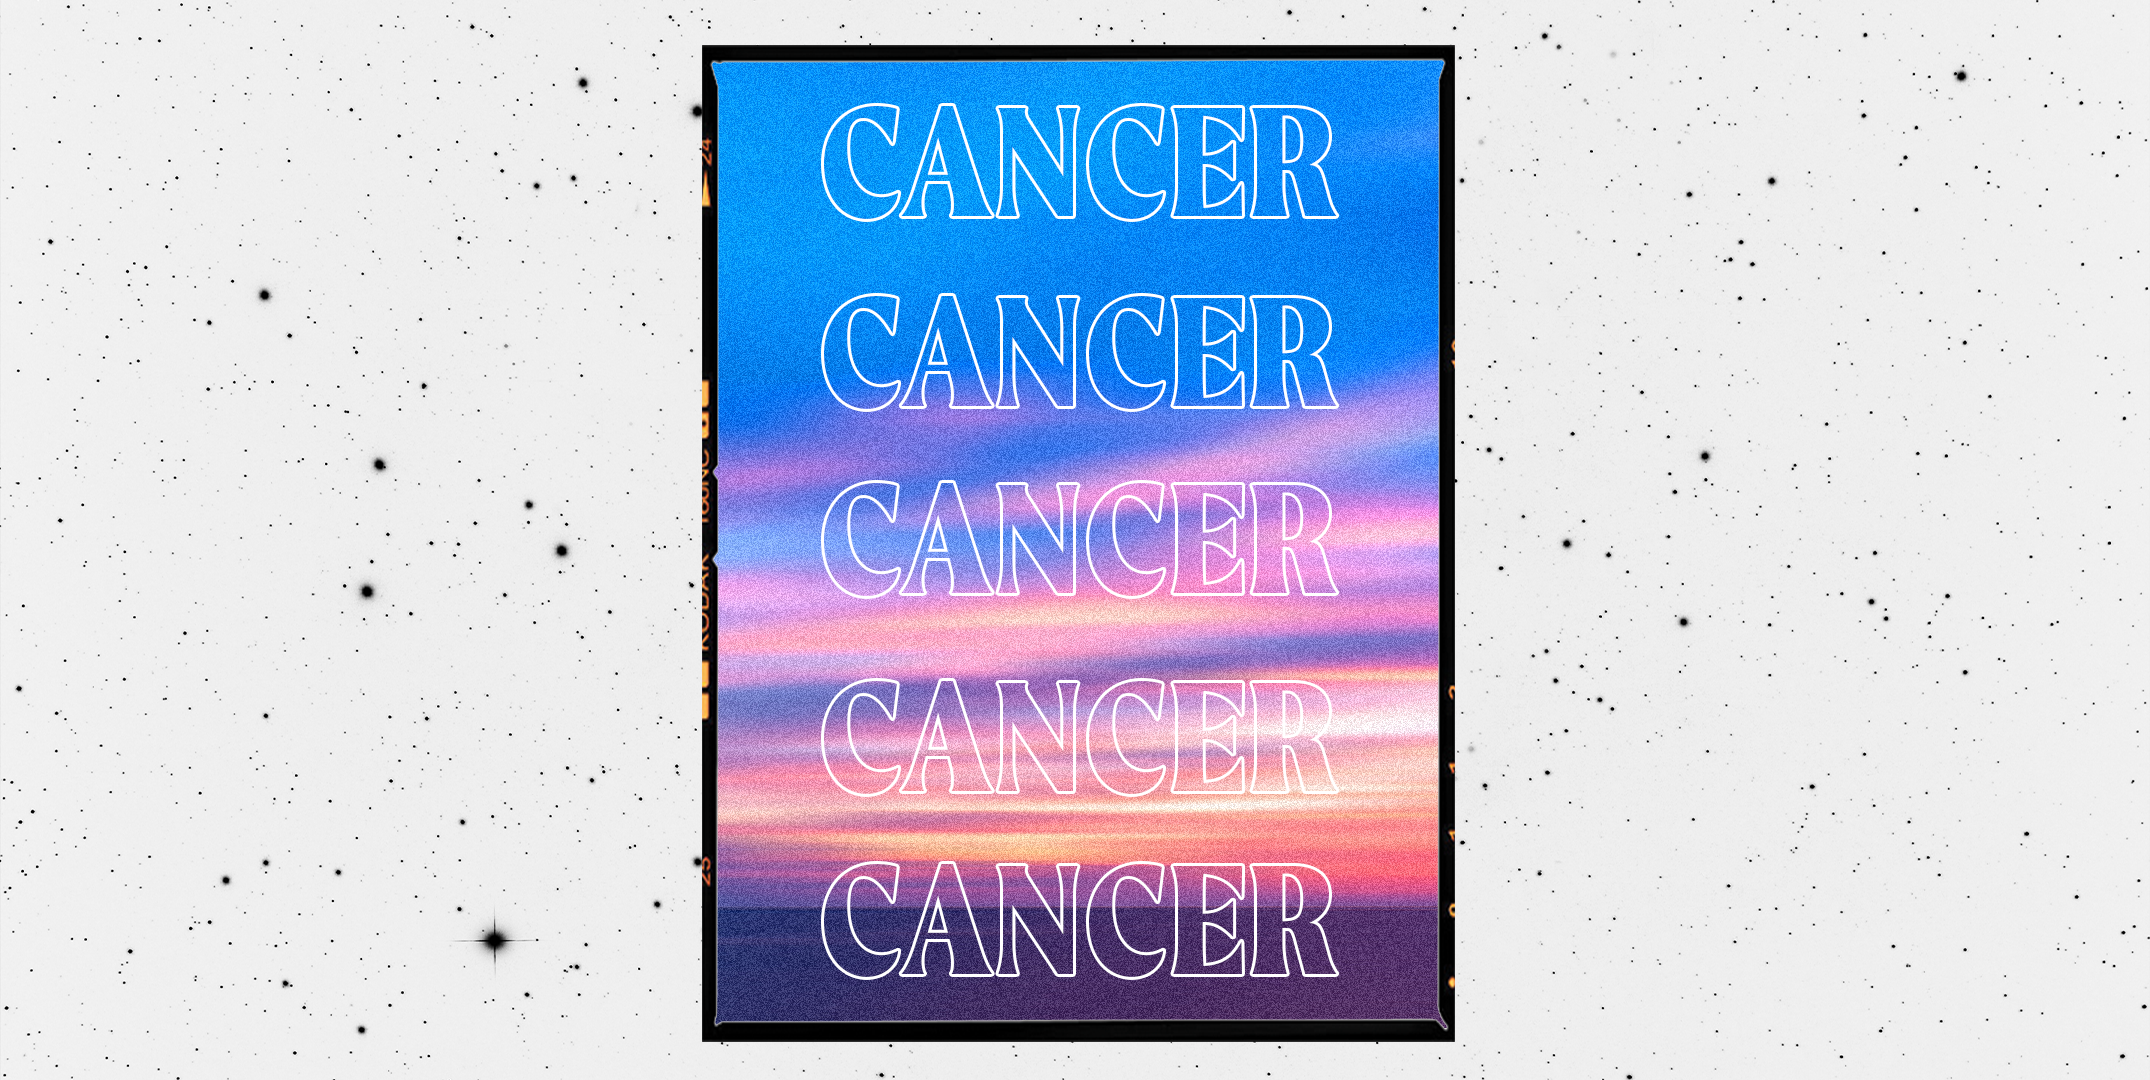 Cancer Woman Personality Traits And Characteristics Dating A Cancer